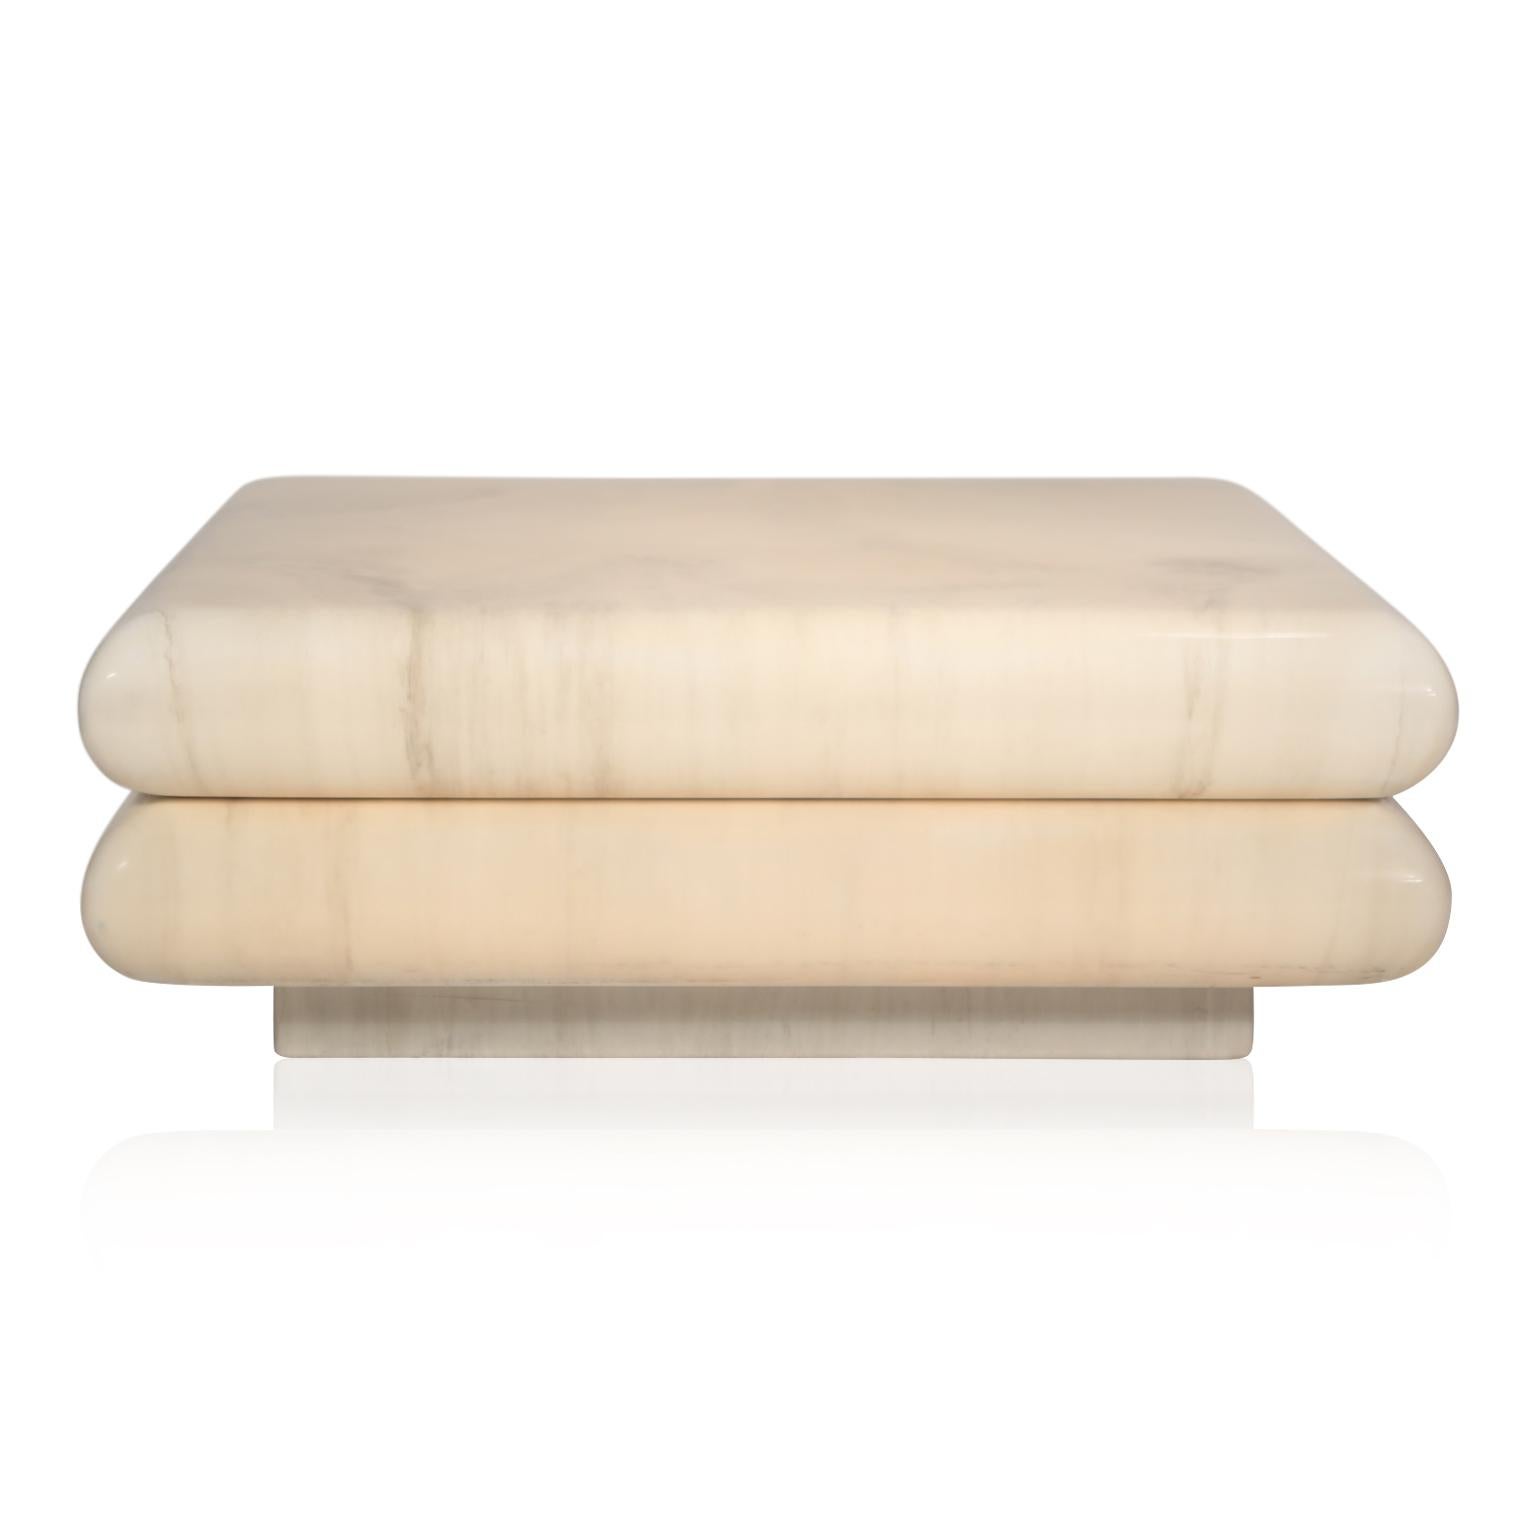 This layered coffee table floats on a plinth base and is covered in sumptuous lacquered goatskin. The goatskin color and veining is remarkable, a nice soft beige / tan color with grey veining which resembles marble and is so designer on-trend. The